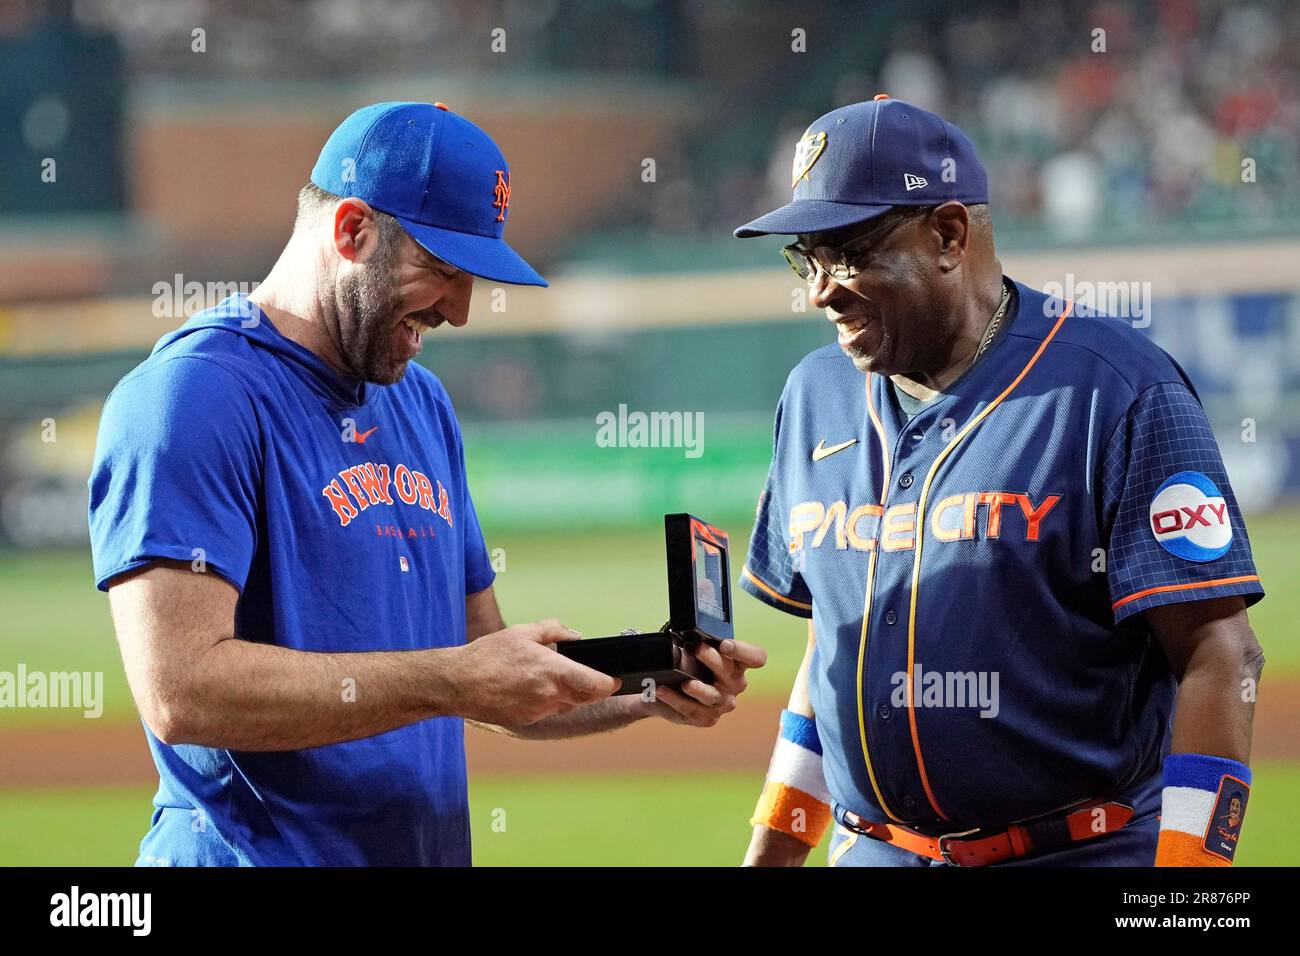 Houston Astros manager Dusty Baker Jr., right, presents New York Mets  pitcher Justin Verlander his 2022 World Series Championship ring before a  baseball game Monday, June 19, 2023, in Houston. (AP Photo/David